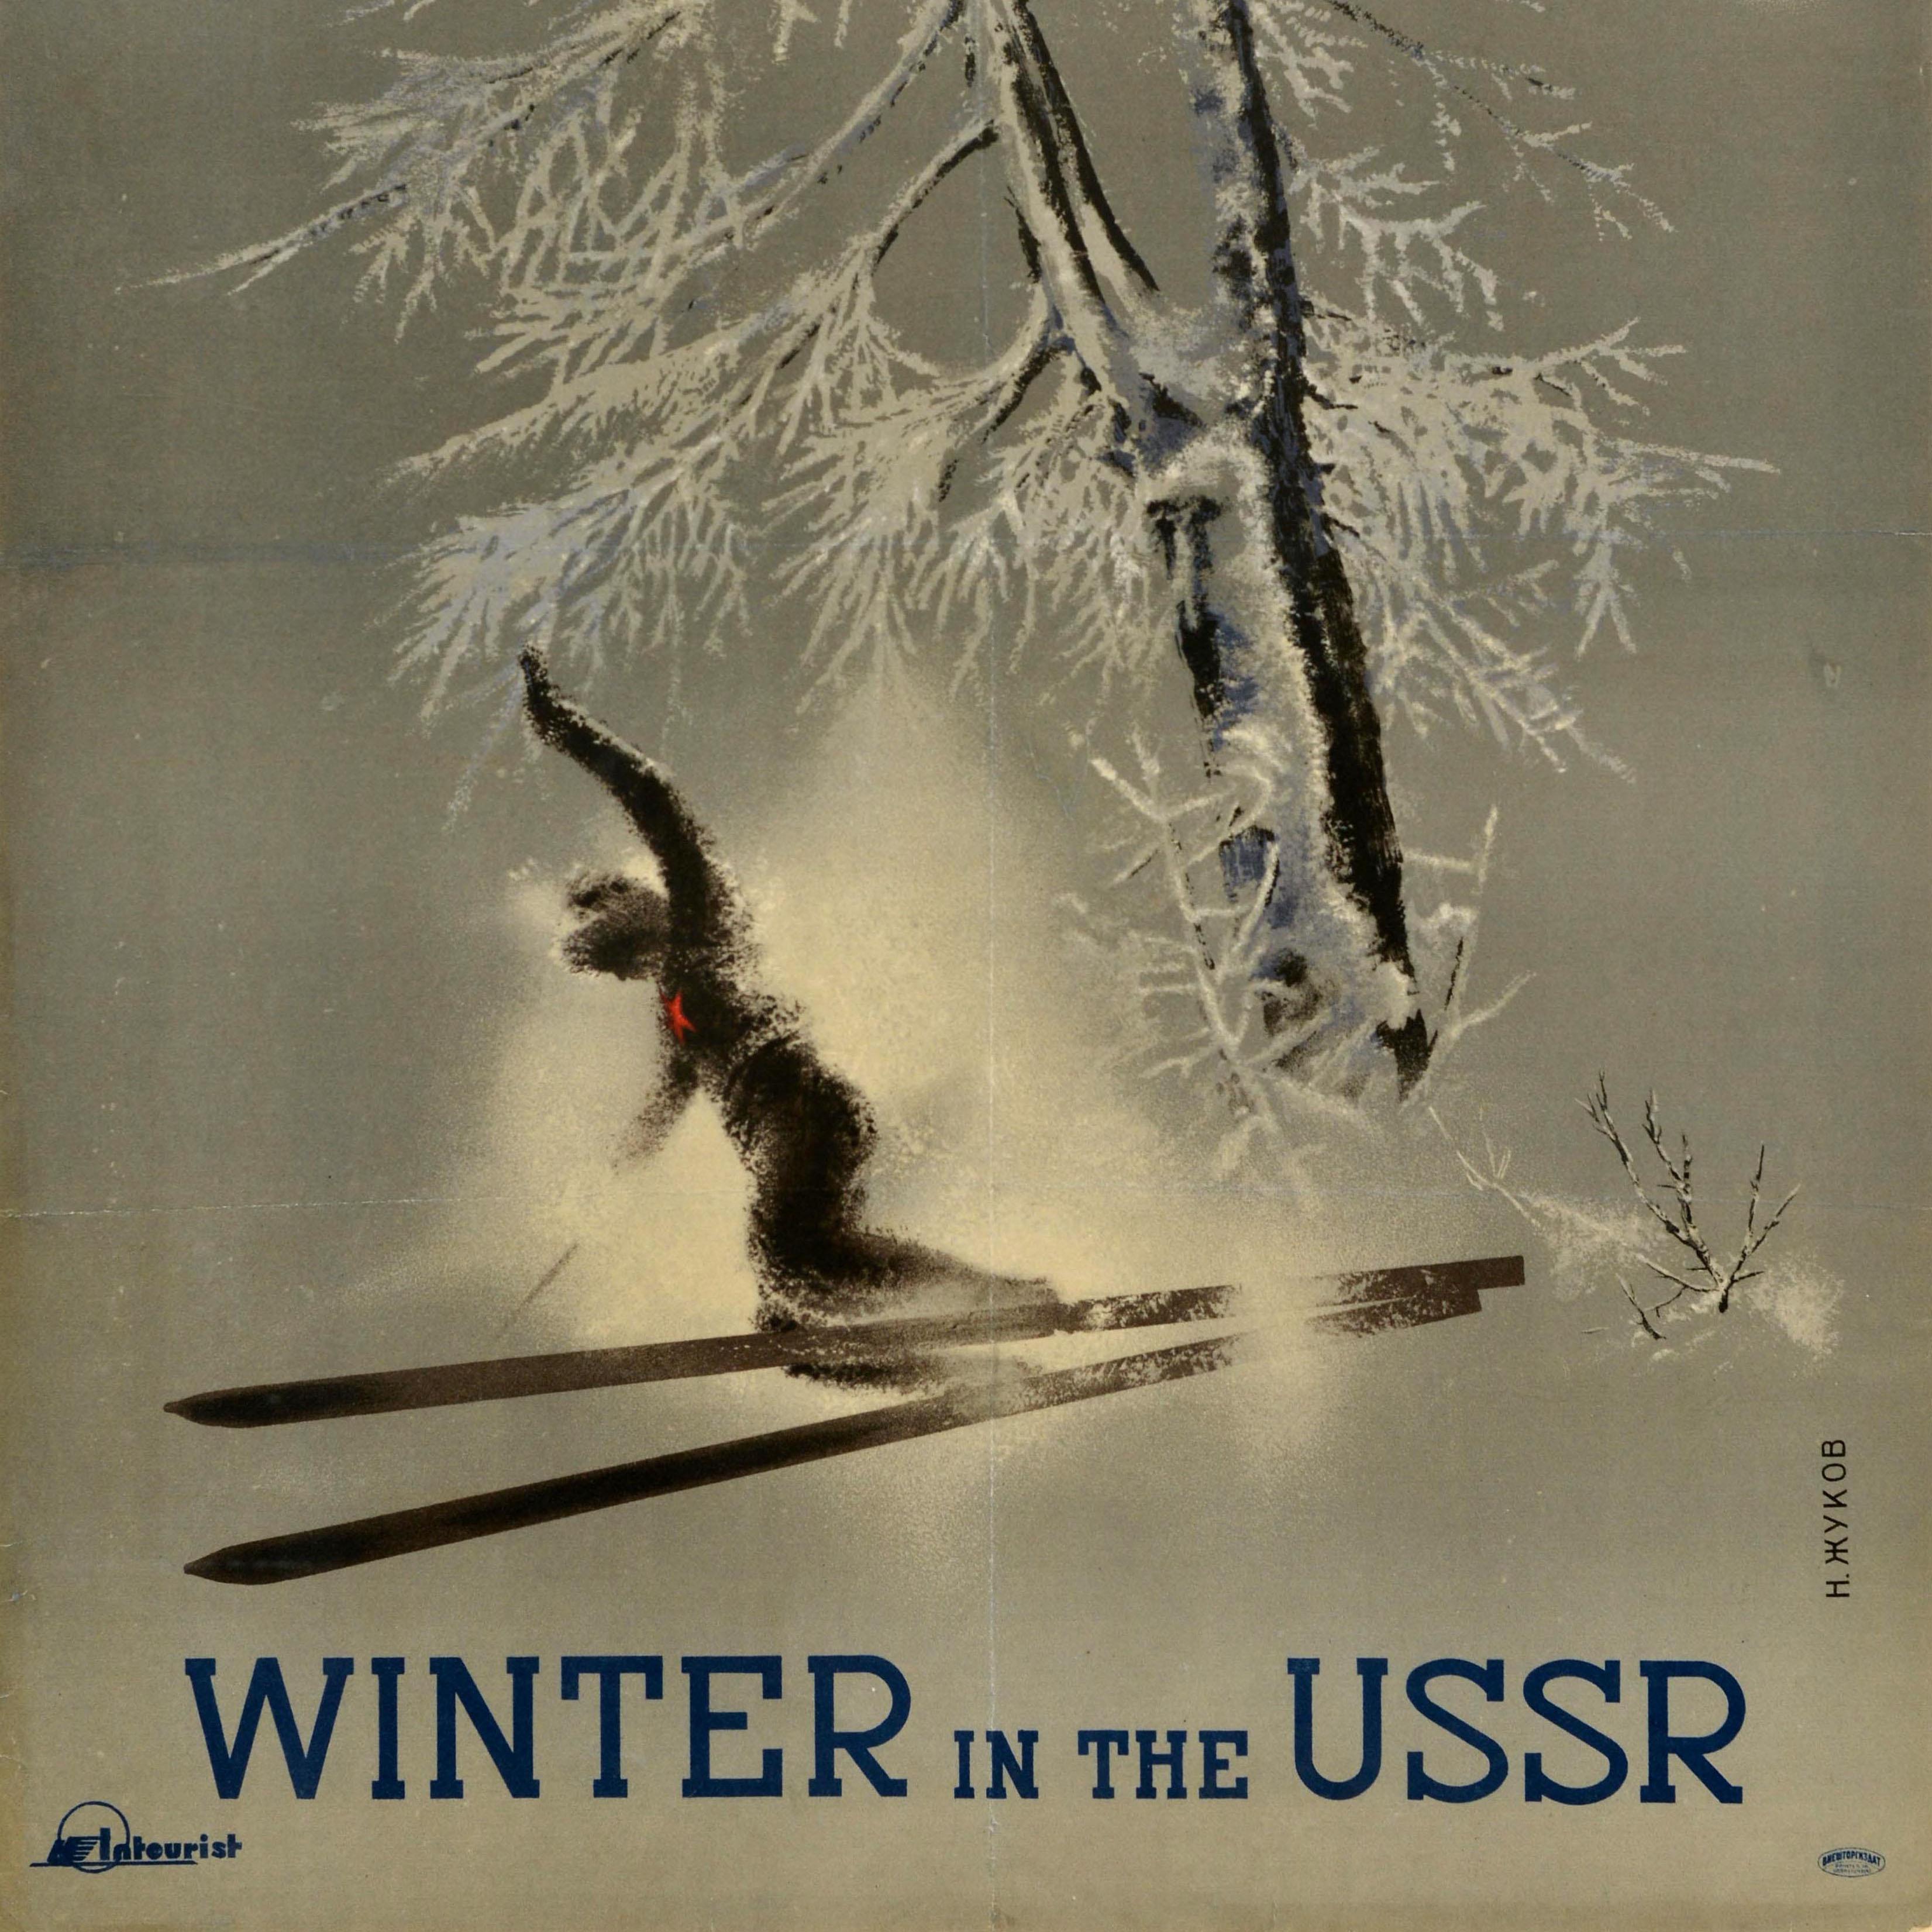 Original vintage Soviet travel poster by Intourist - Winter in the USSR - featuring an illustration by the notable artist Nikolai Zhukov (1908-1973) of skiers skiing down a slope at speed past a snow covered tree with birds in the sky above, the